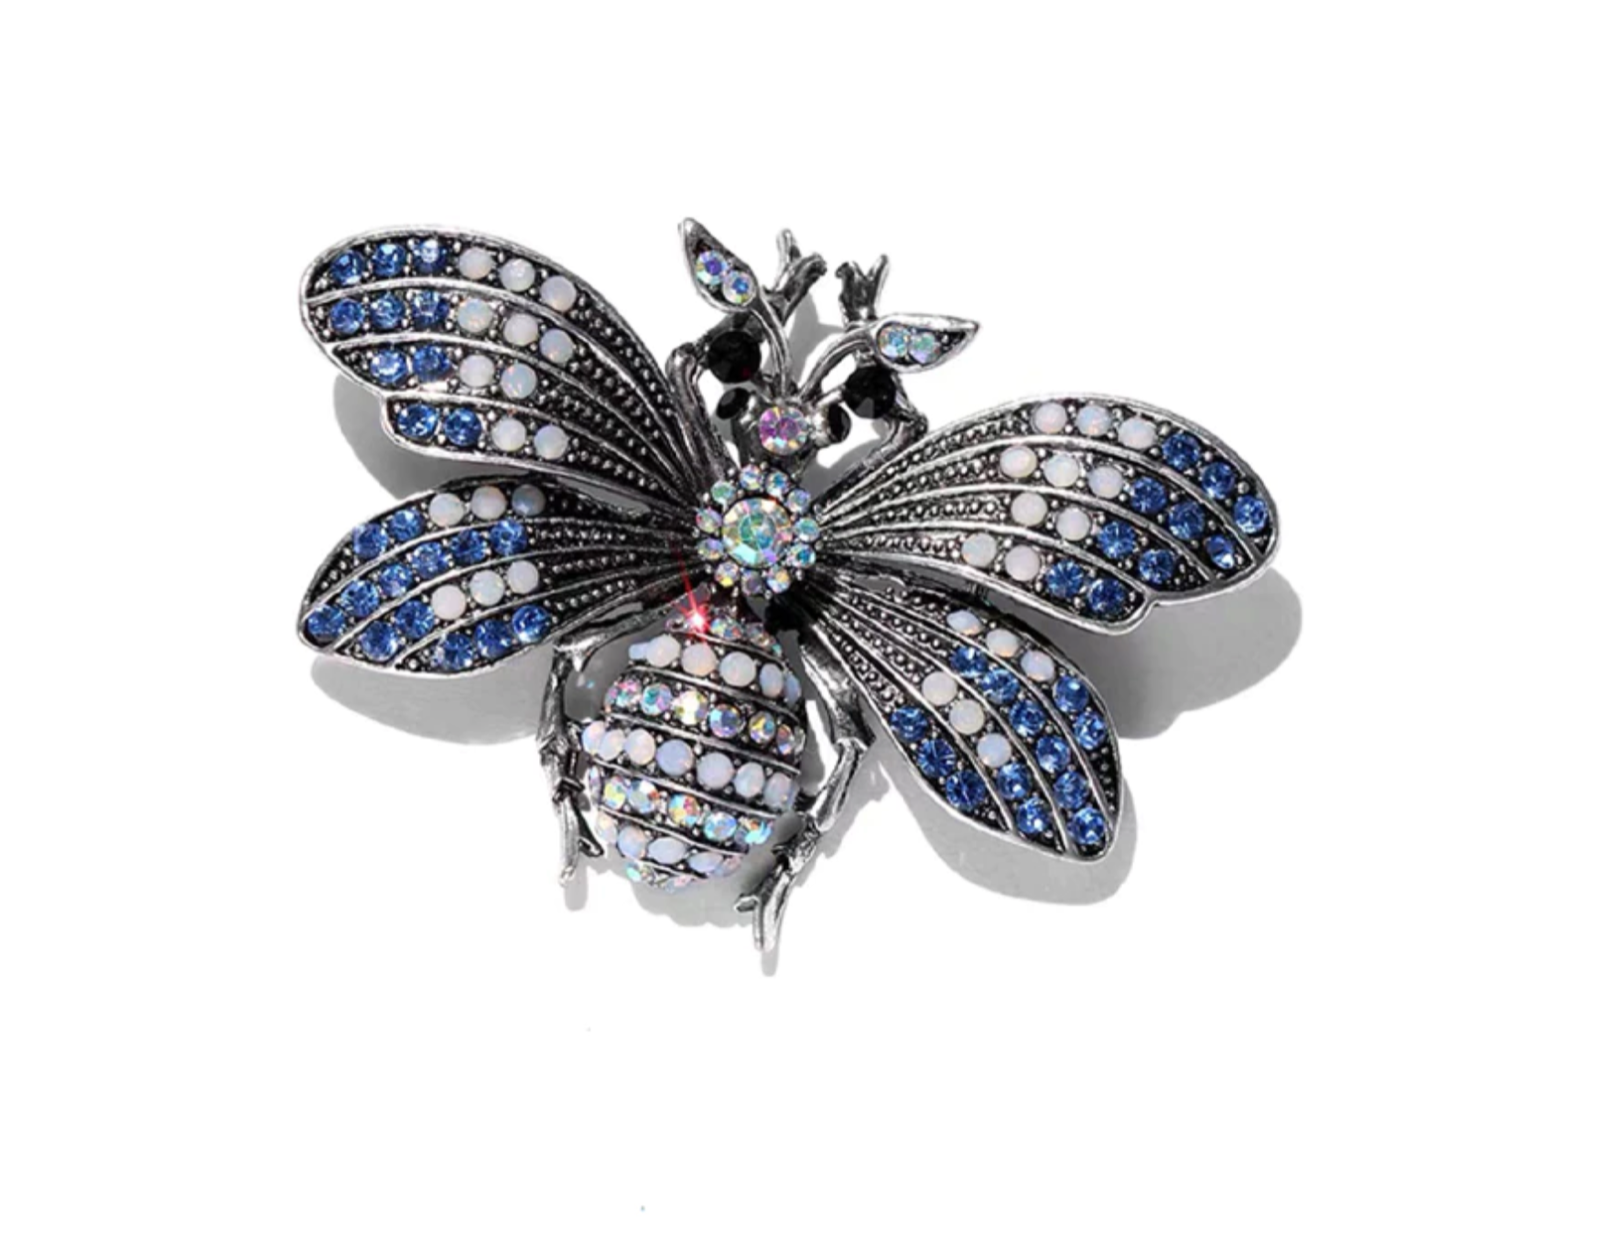 Primary image for Honey Bee Brooch Stunning Silver Plated Blue Diamante Suit Coat Broach Pin GGG38